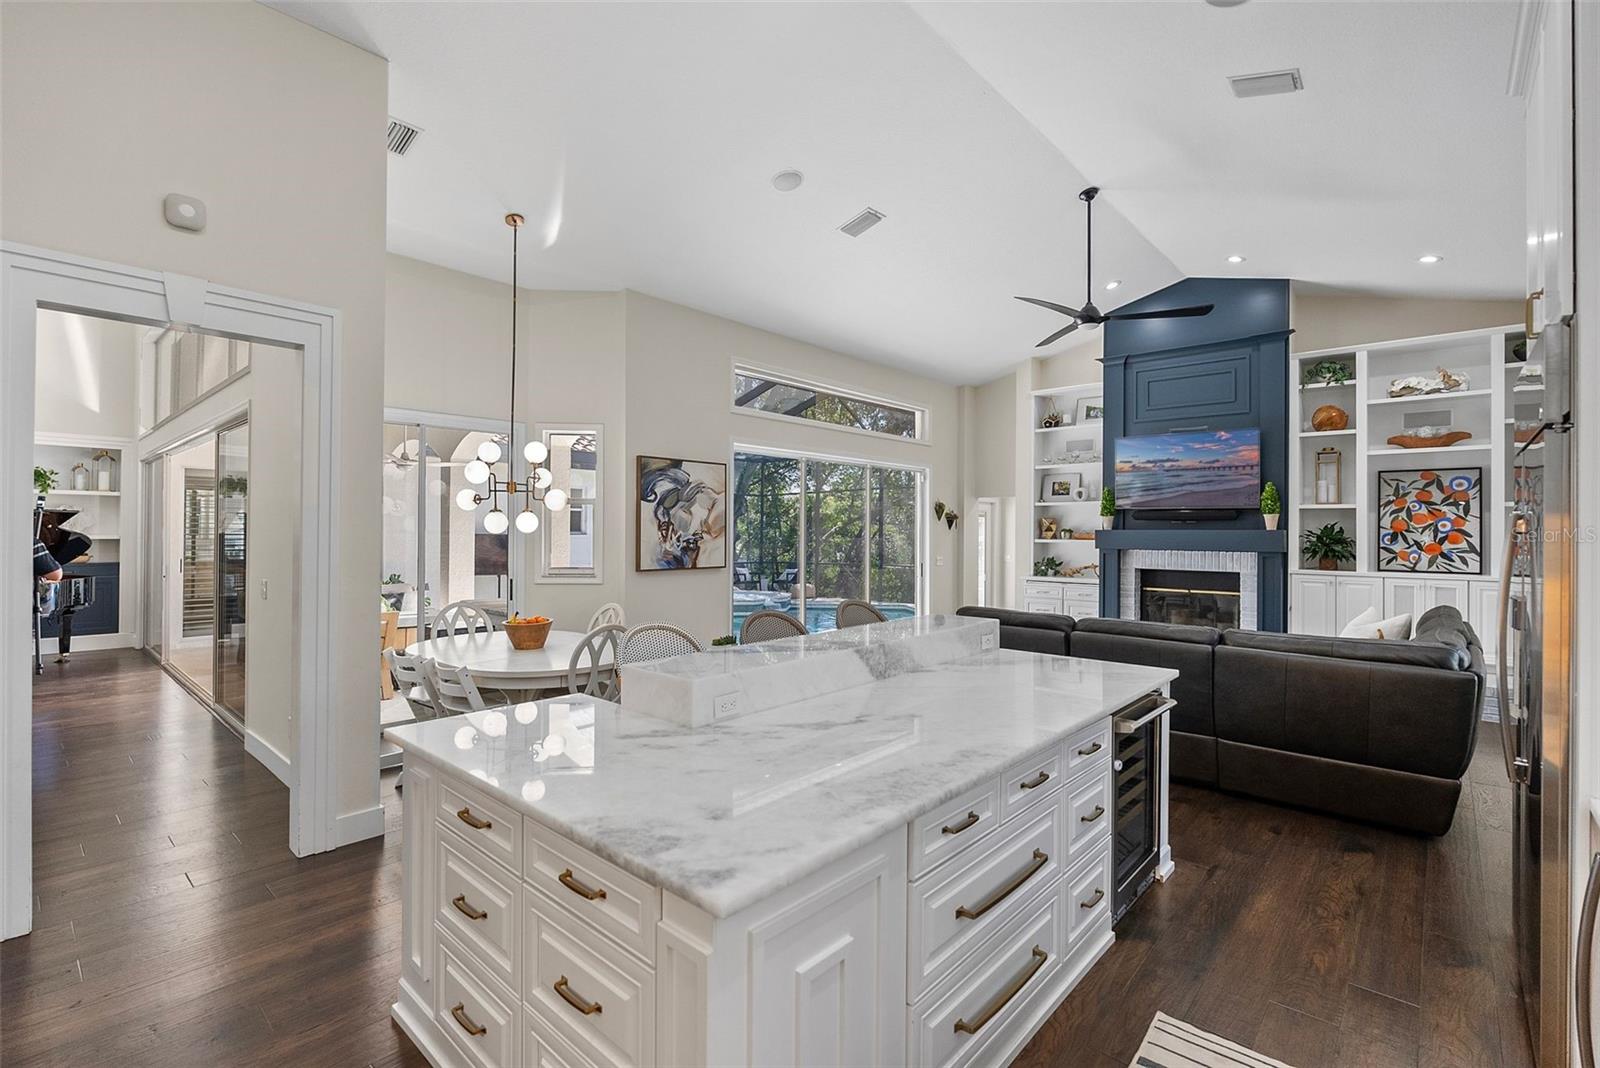 Marble kitchen Island open to the Family room